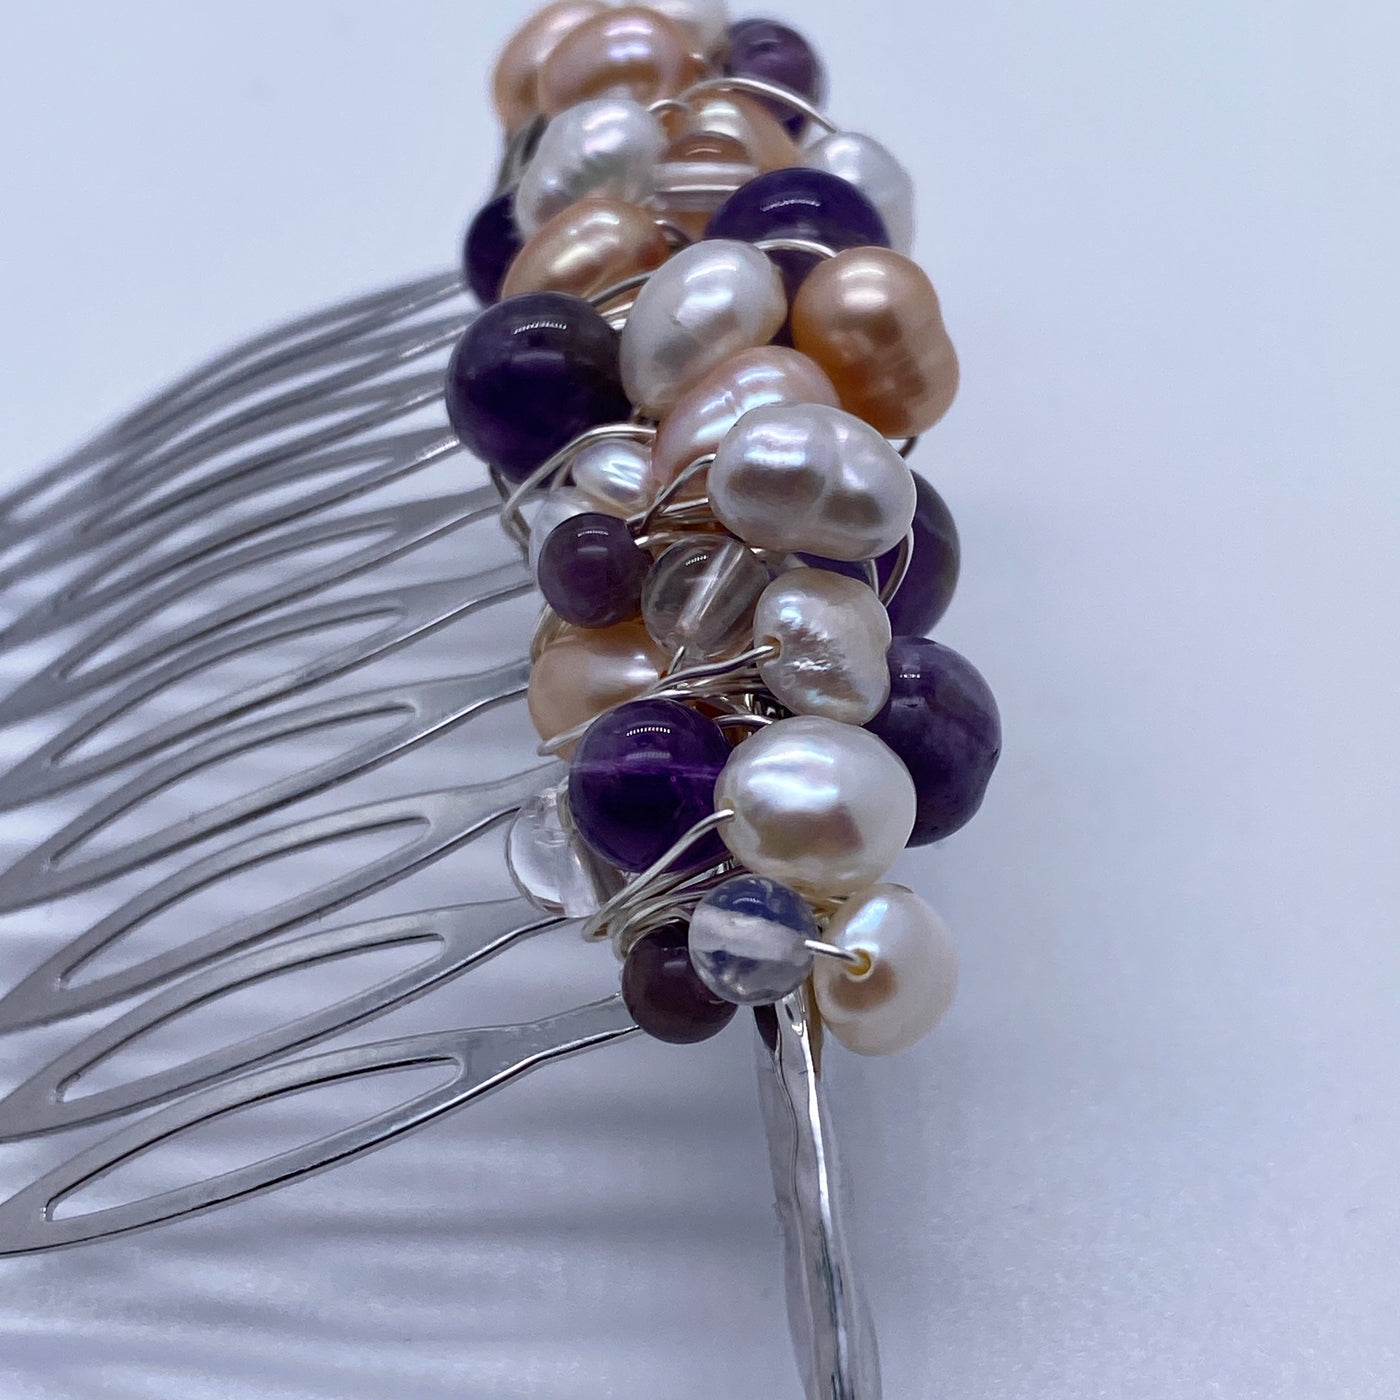 Freshwater pearls in different measures and colors (rose, white), chrystal beads, amethysts and silver wire for this french twist 10 teeths comb alloy metal bridal wedding hair side comb silver color